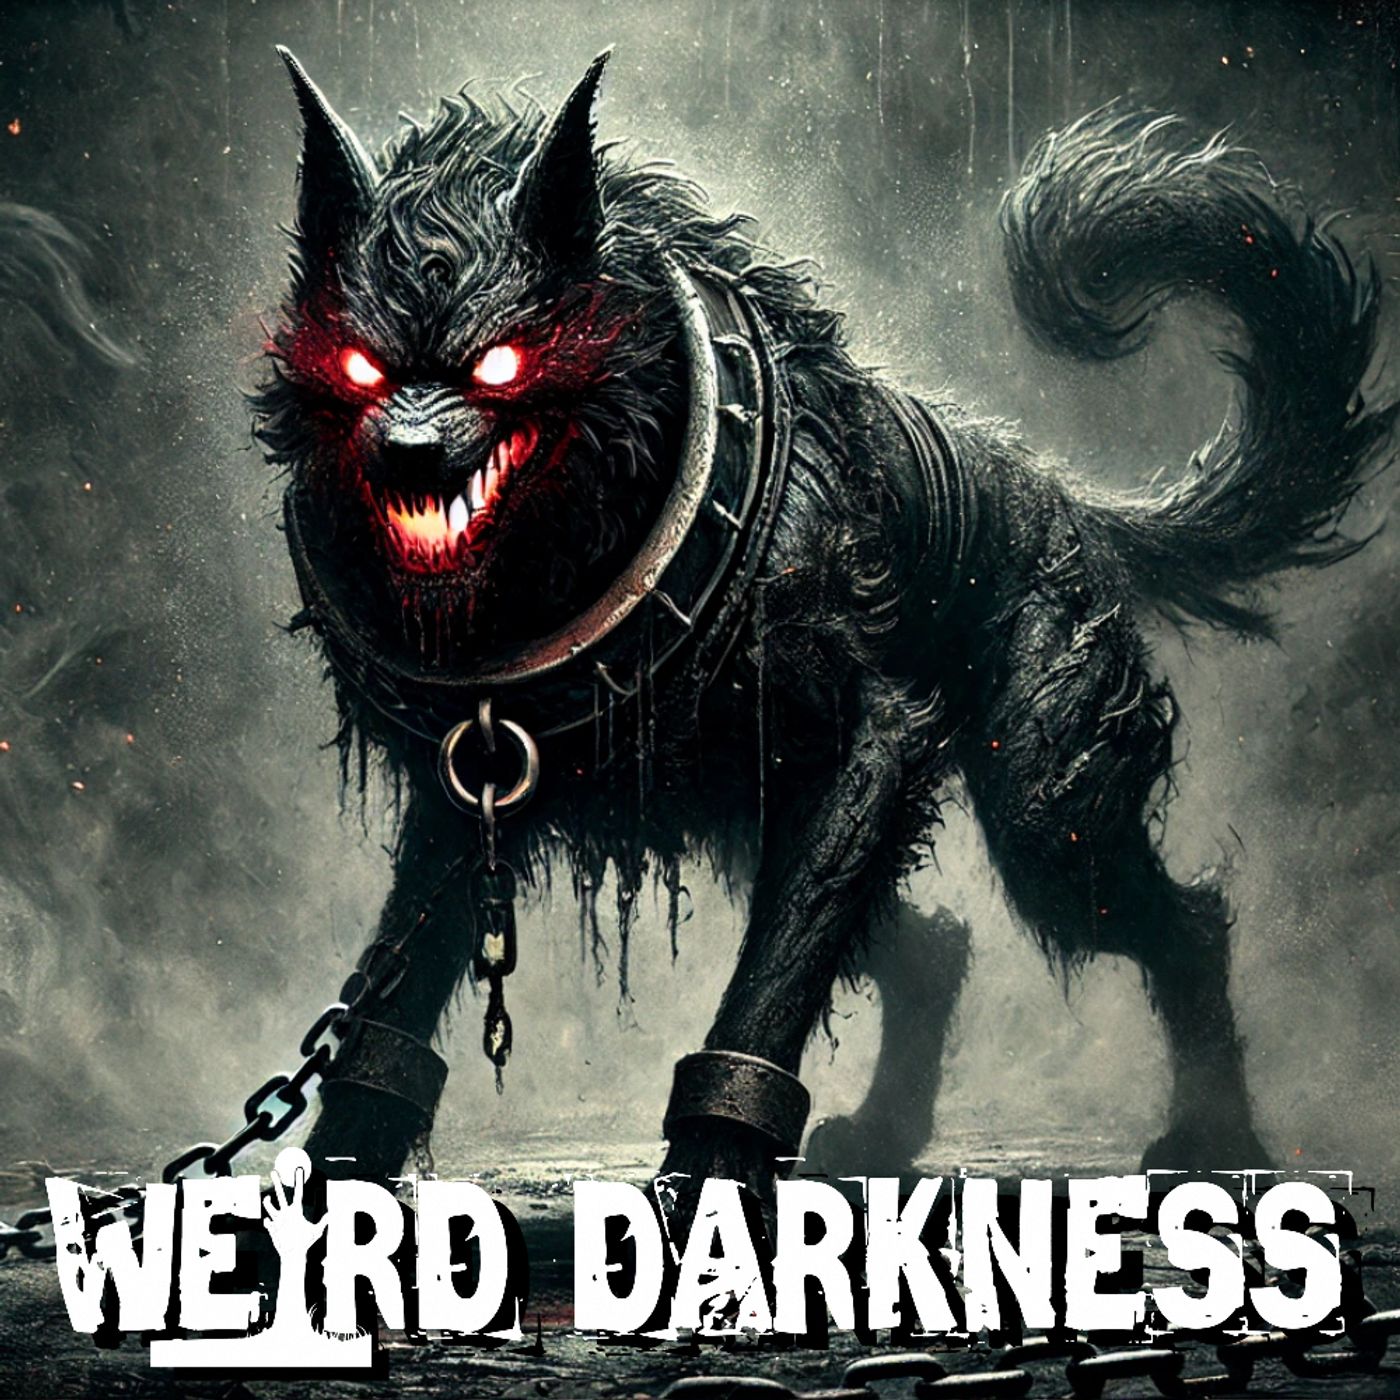 “TRUE TALES OF HELLHOUNDS: ANCIENT MYTHS TO MODERN CASES” and More True Stories! #WeirdDarkness